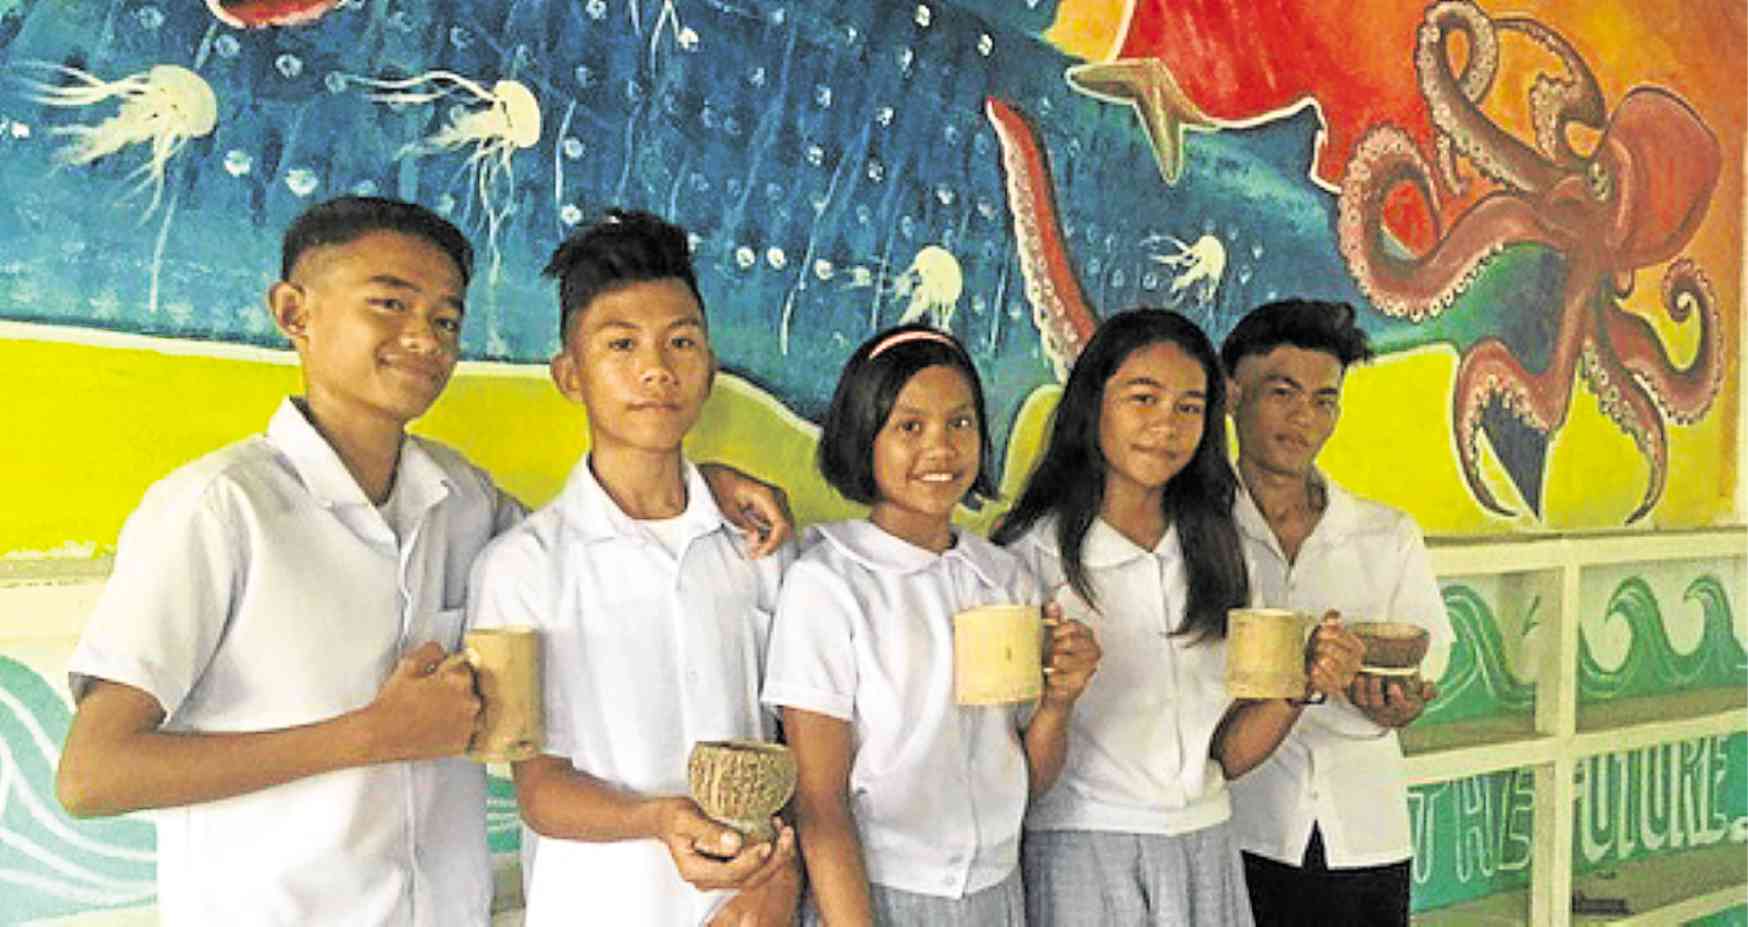 Plastic-free culture gains ground in Negros Occidental school